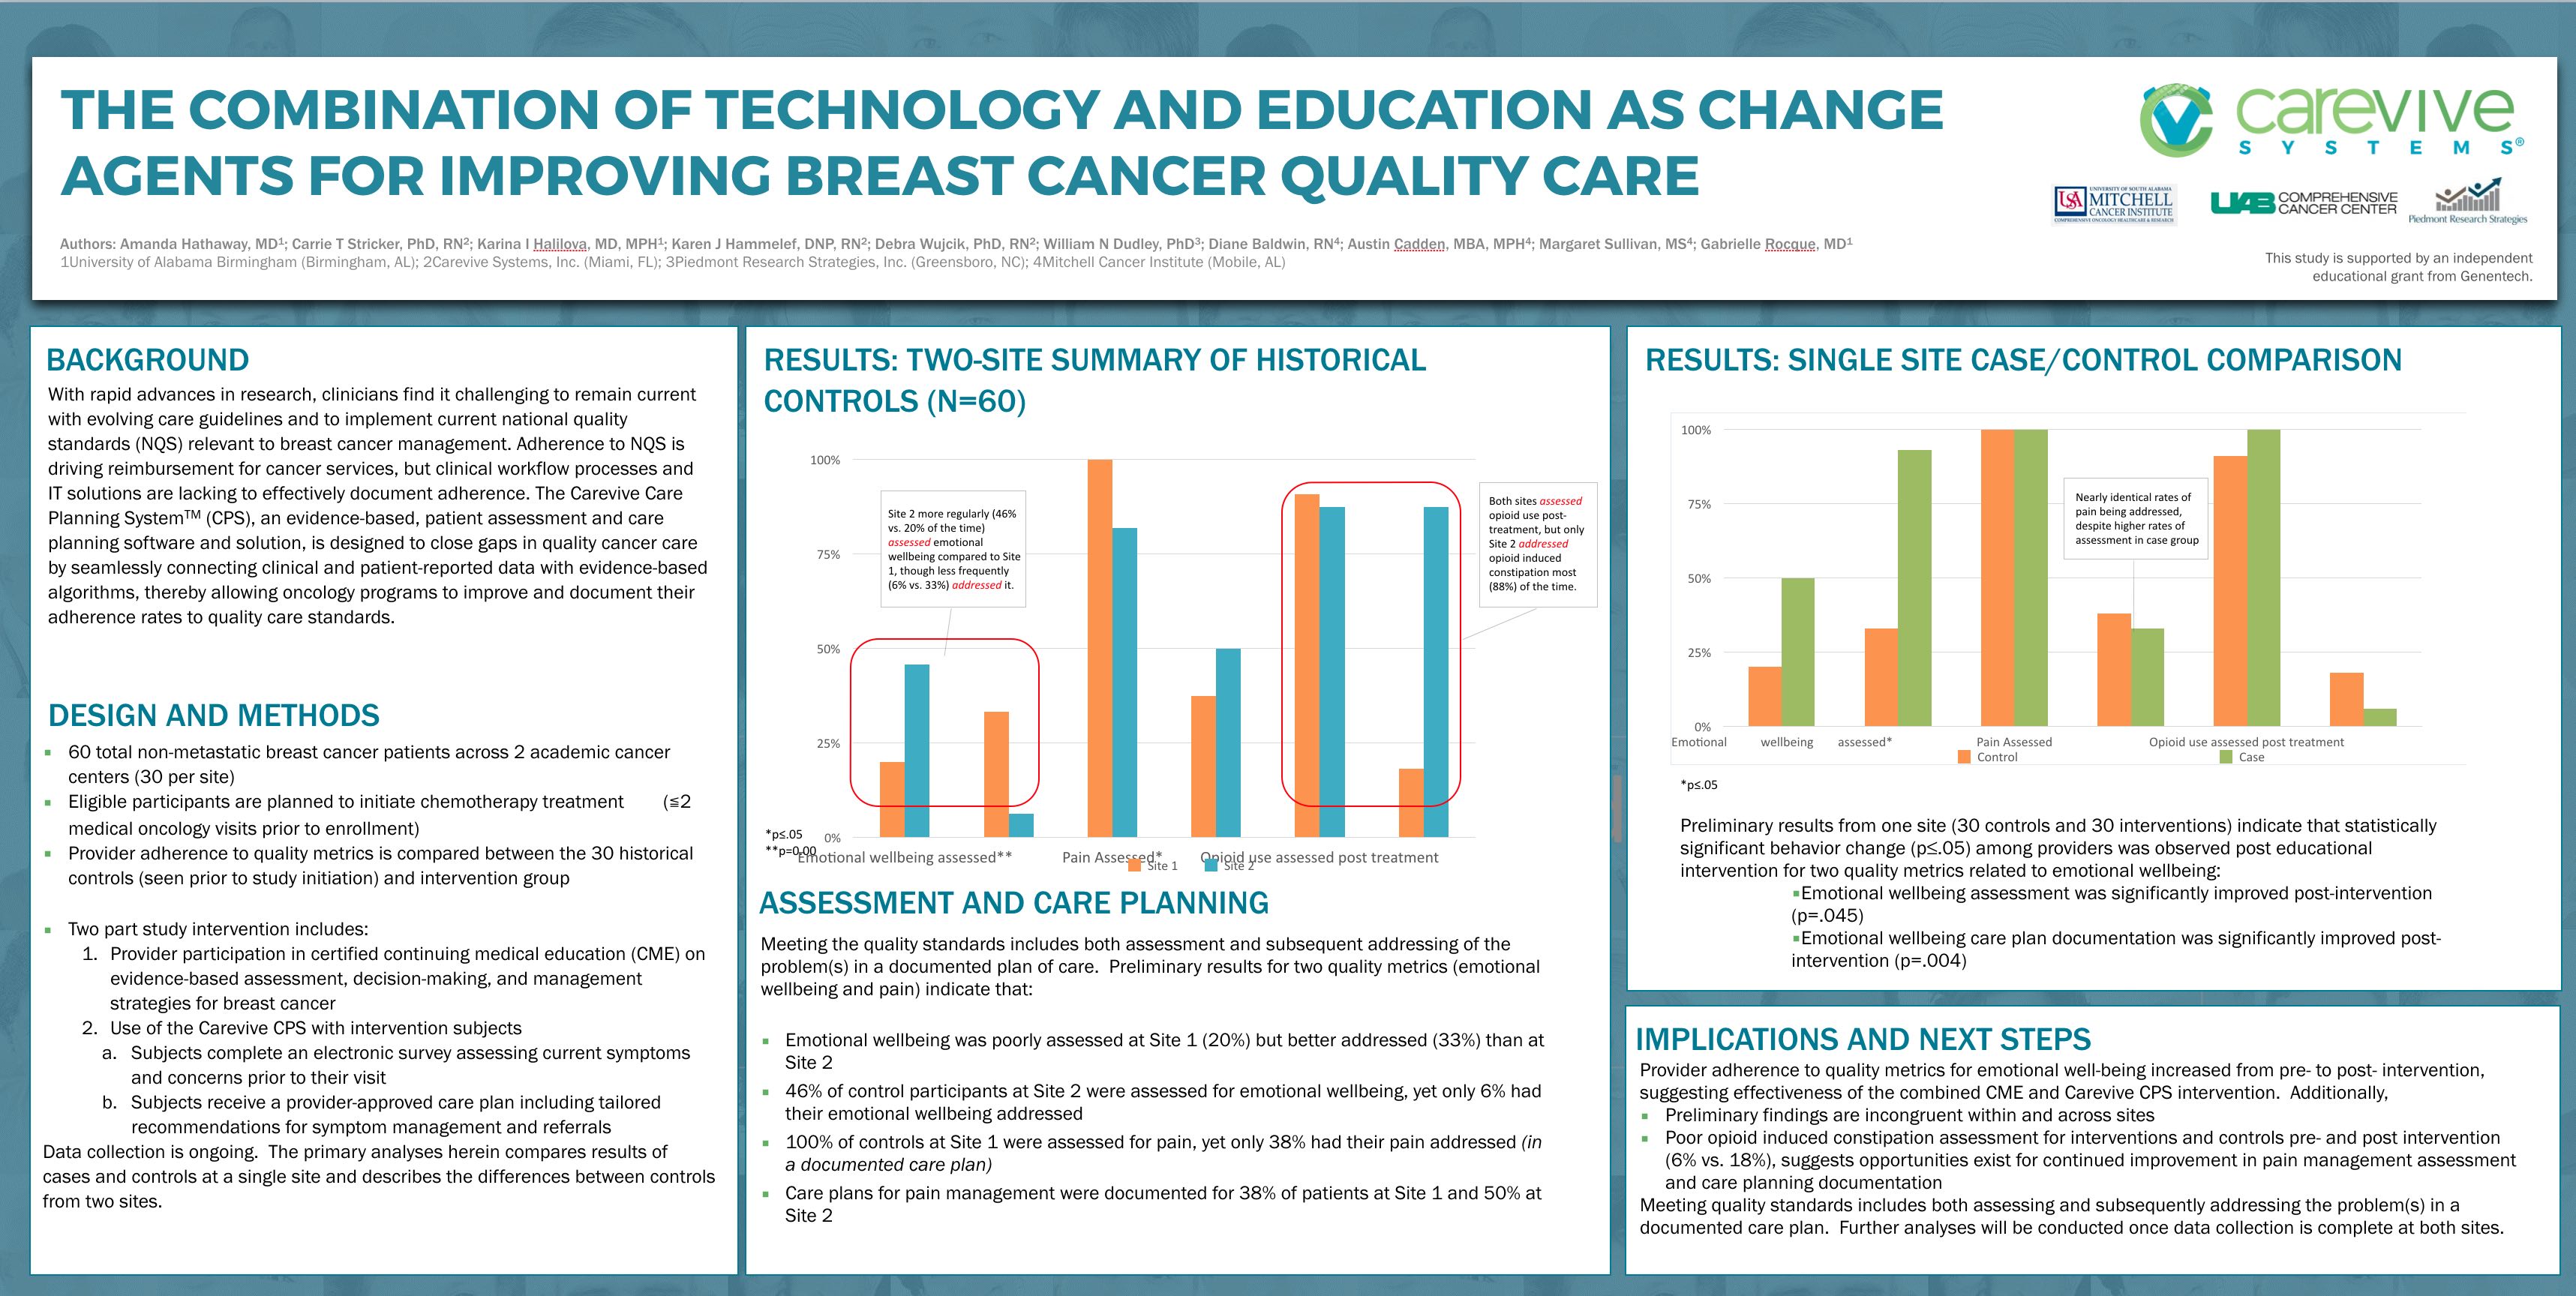 The Combination of Technology and Education as Change Agents for Improving Breast Cancer Quality Care